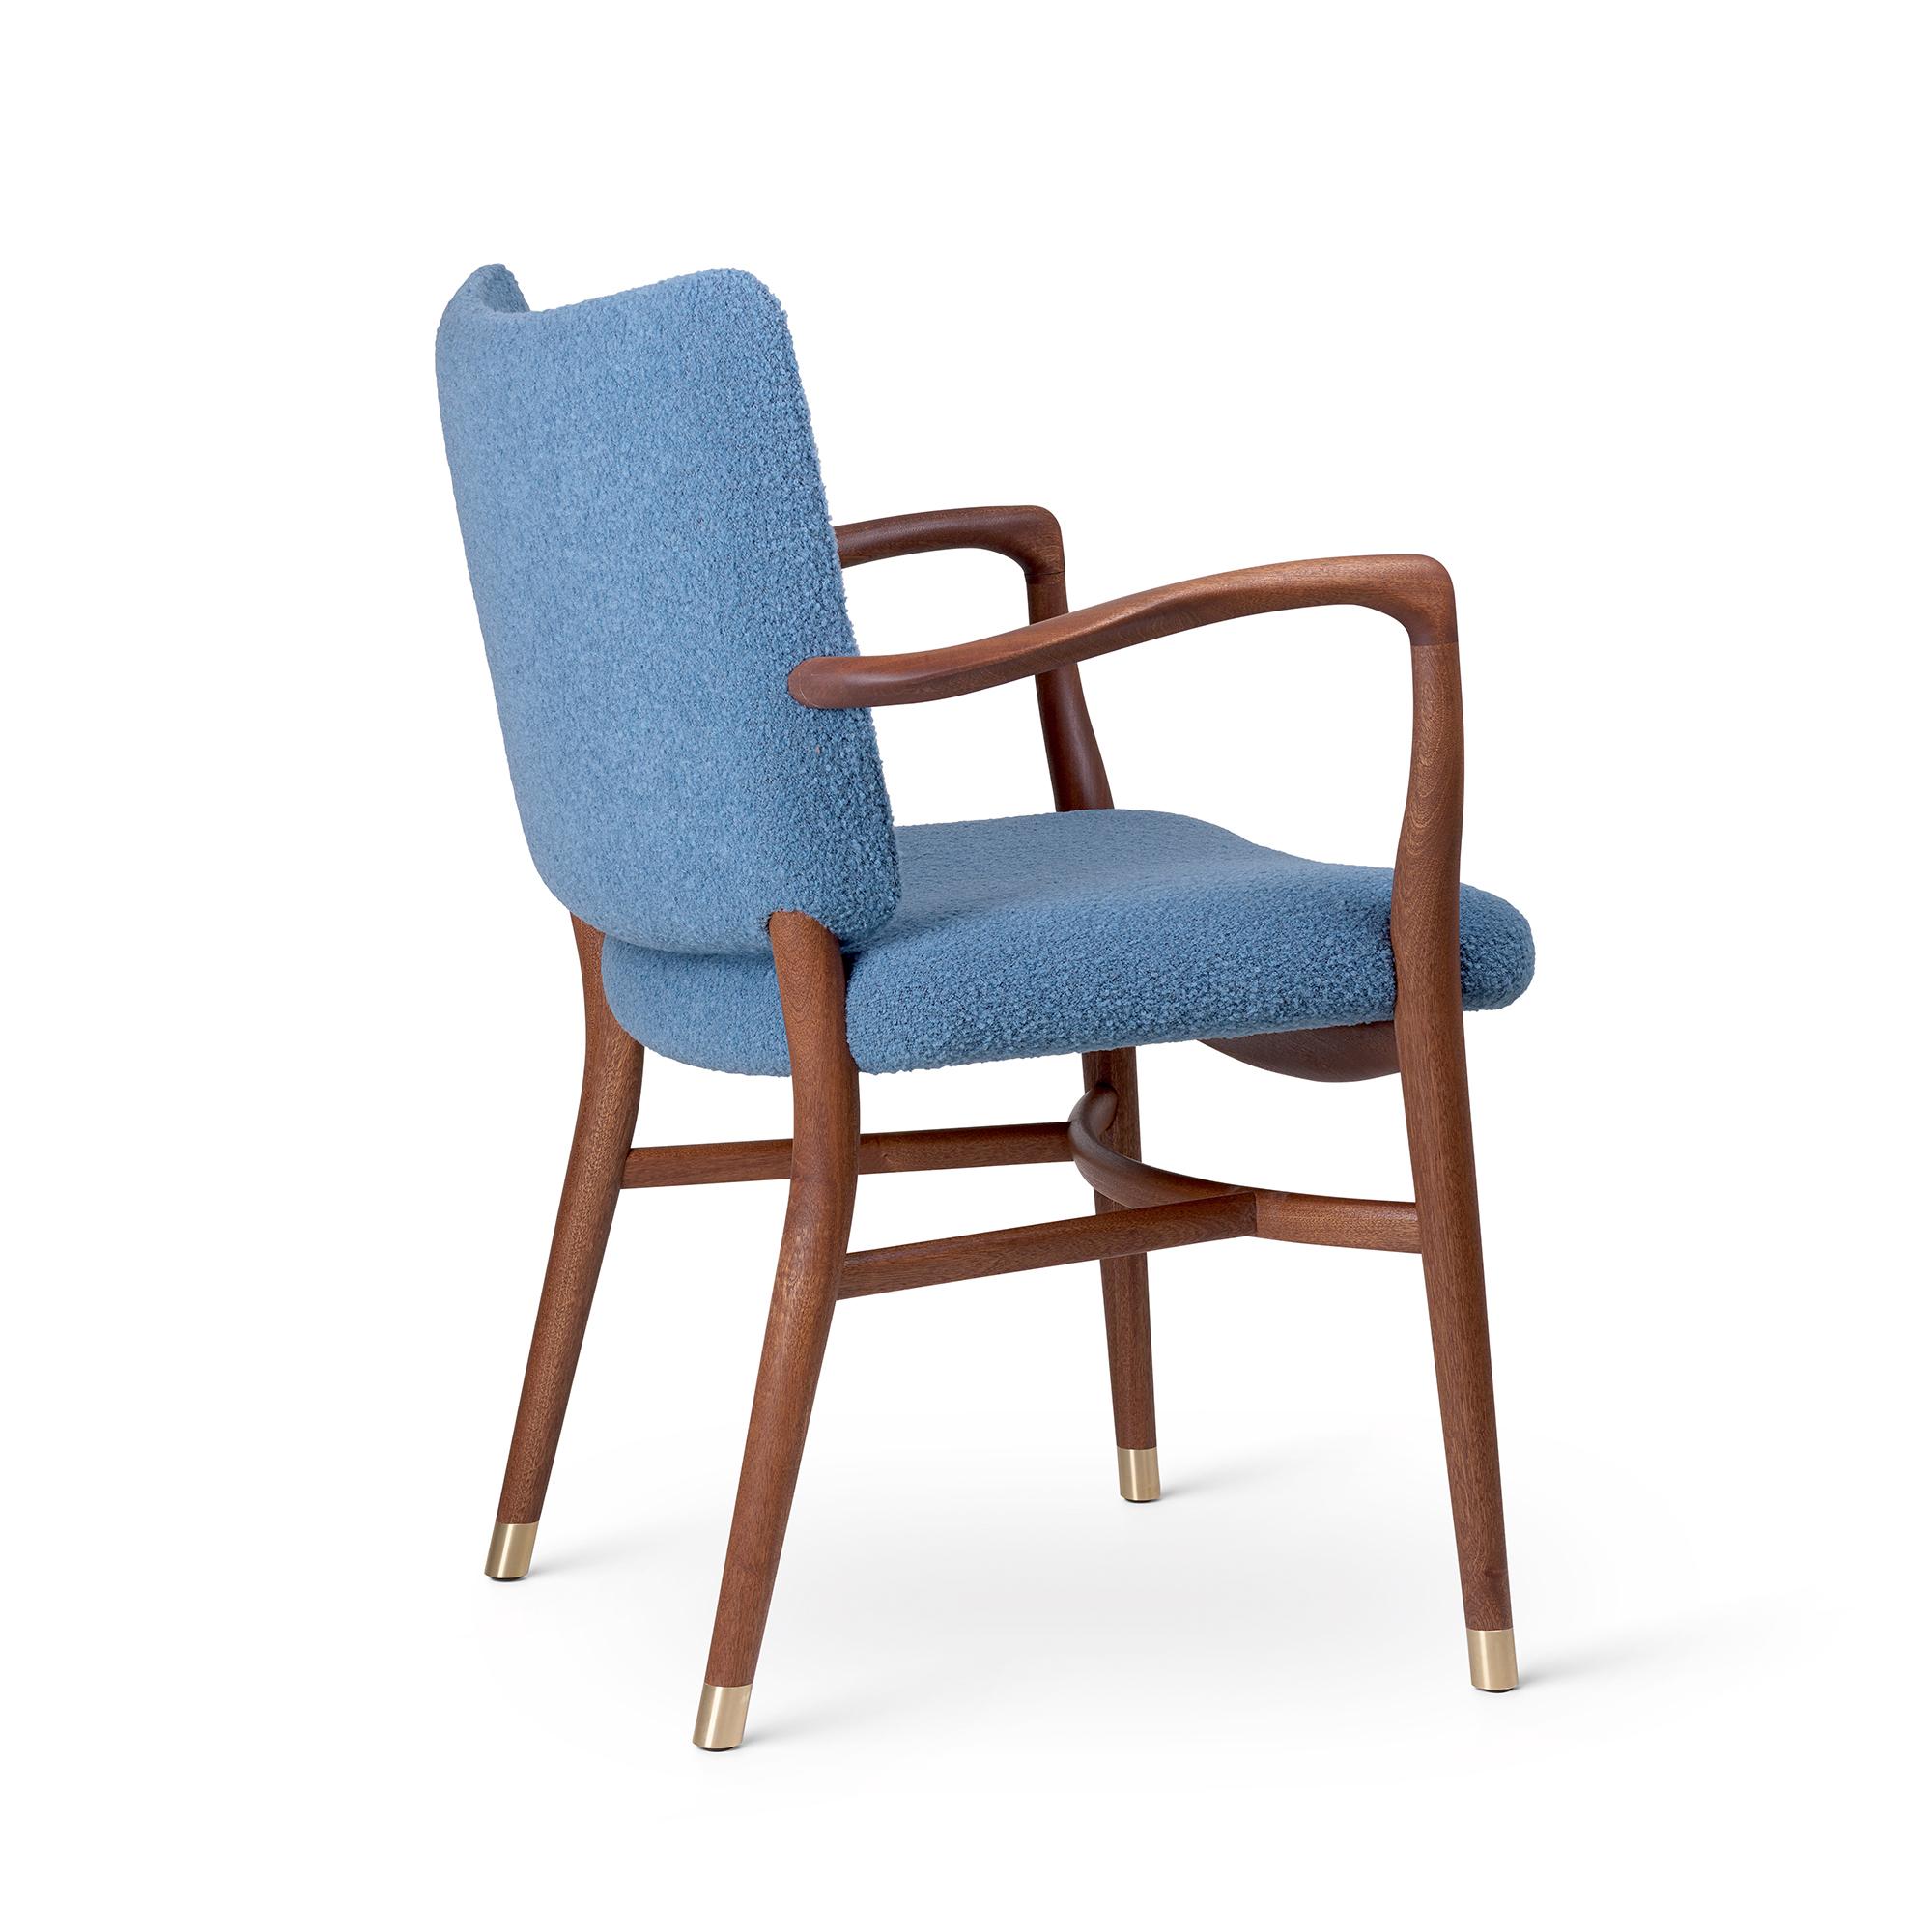 Vilhelm Lauritzen 'VLA61' Chair in Mahogany and Fabric for Carl Hansen & Son.

The story of Danish Modern begins in 1908 when Carl Hansen opened his first workshop. His firm commitment to beauty, comfort, refinement, and craftsmanship is evident in